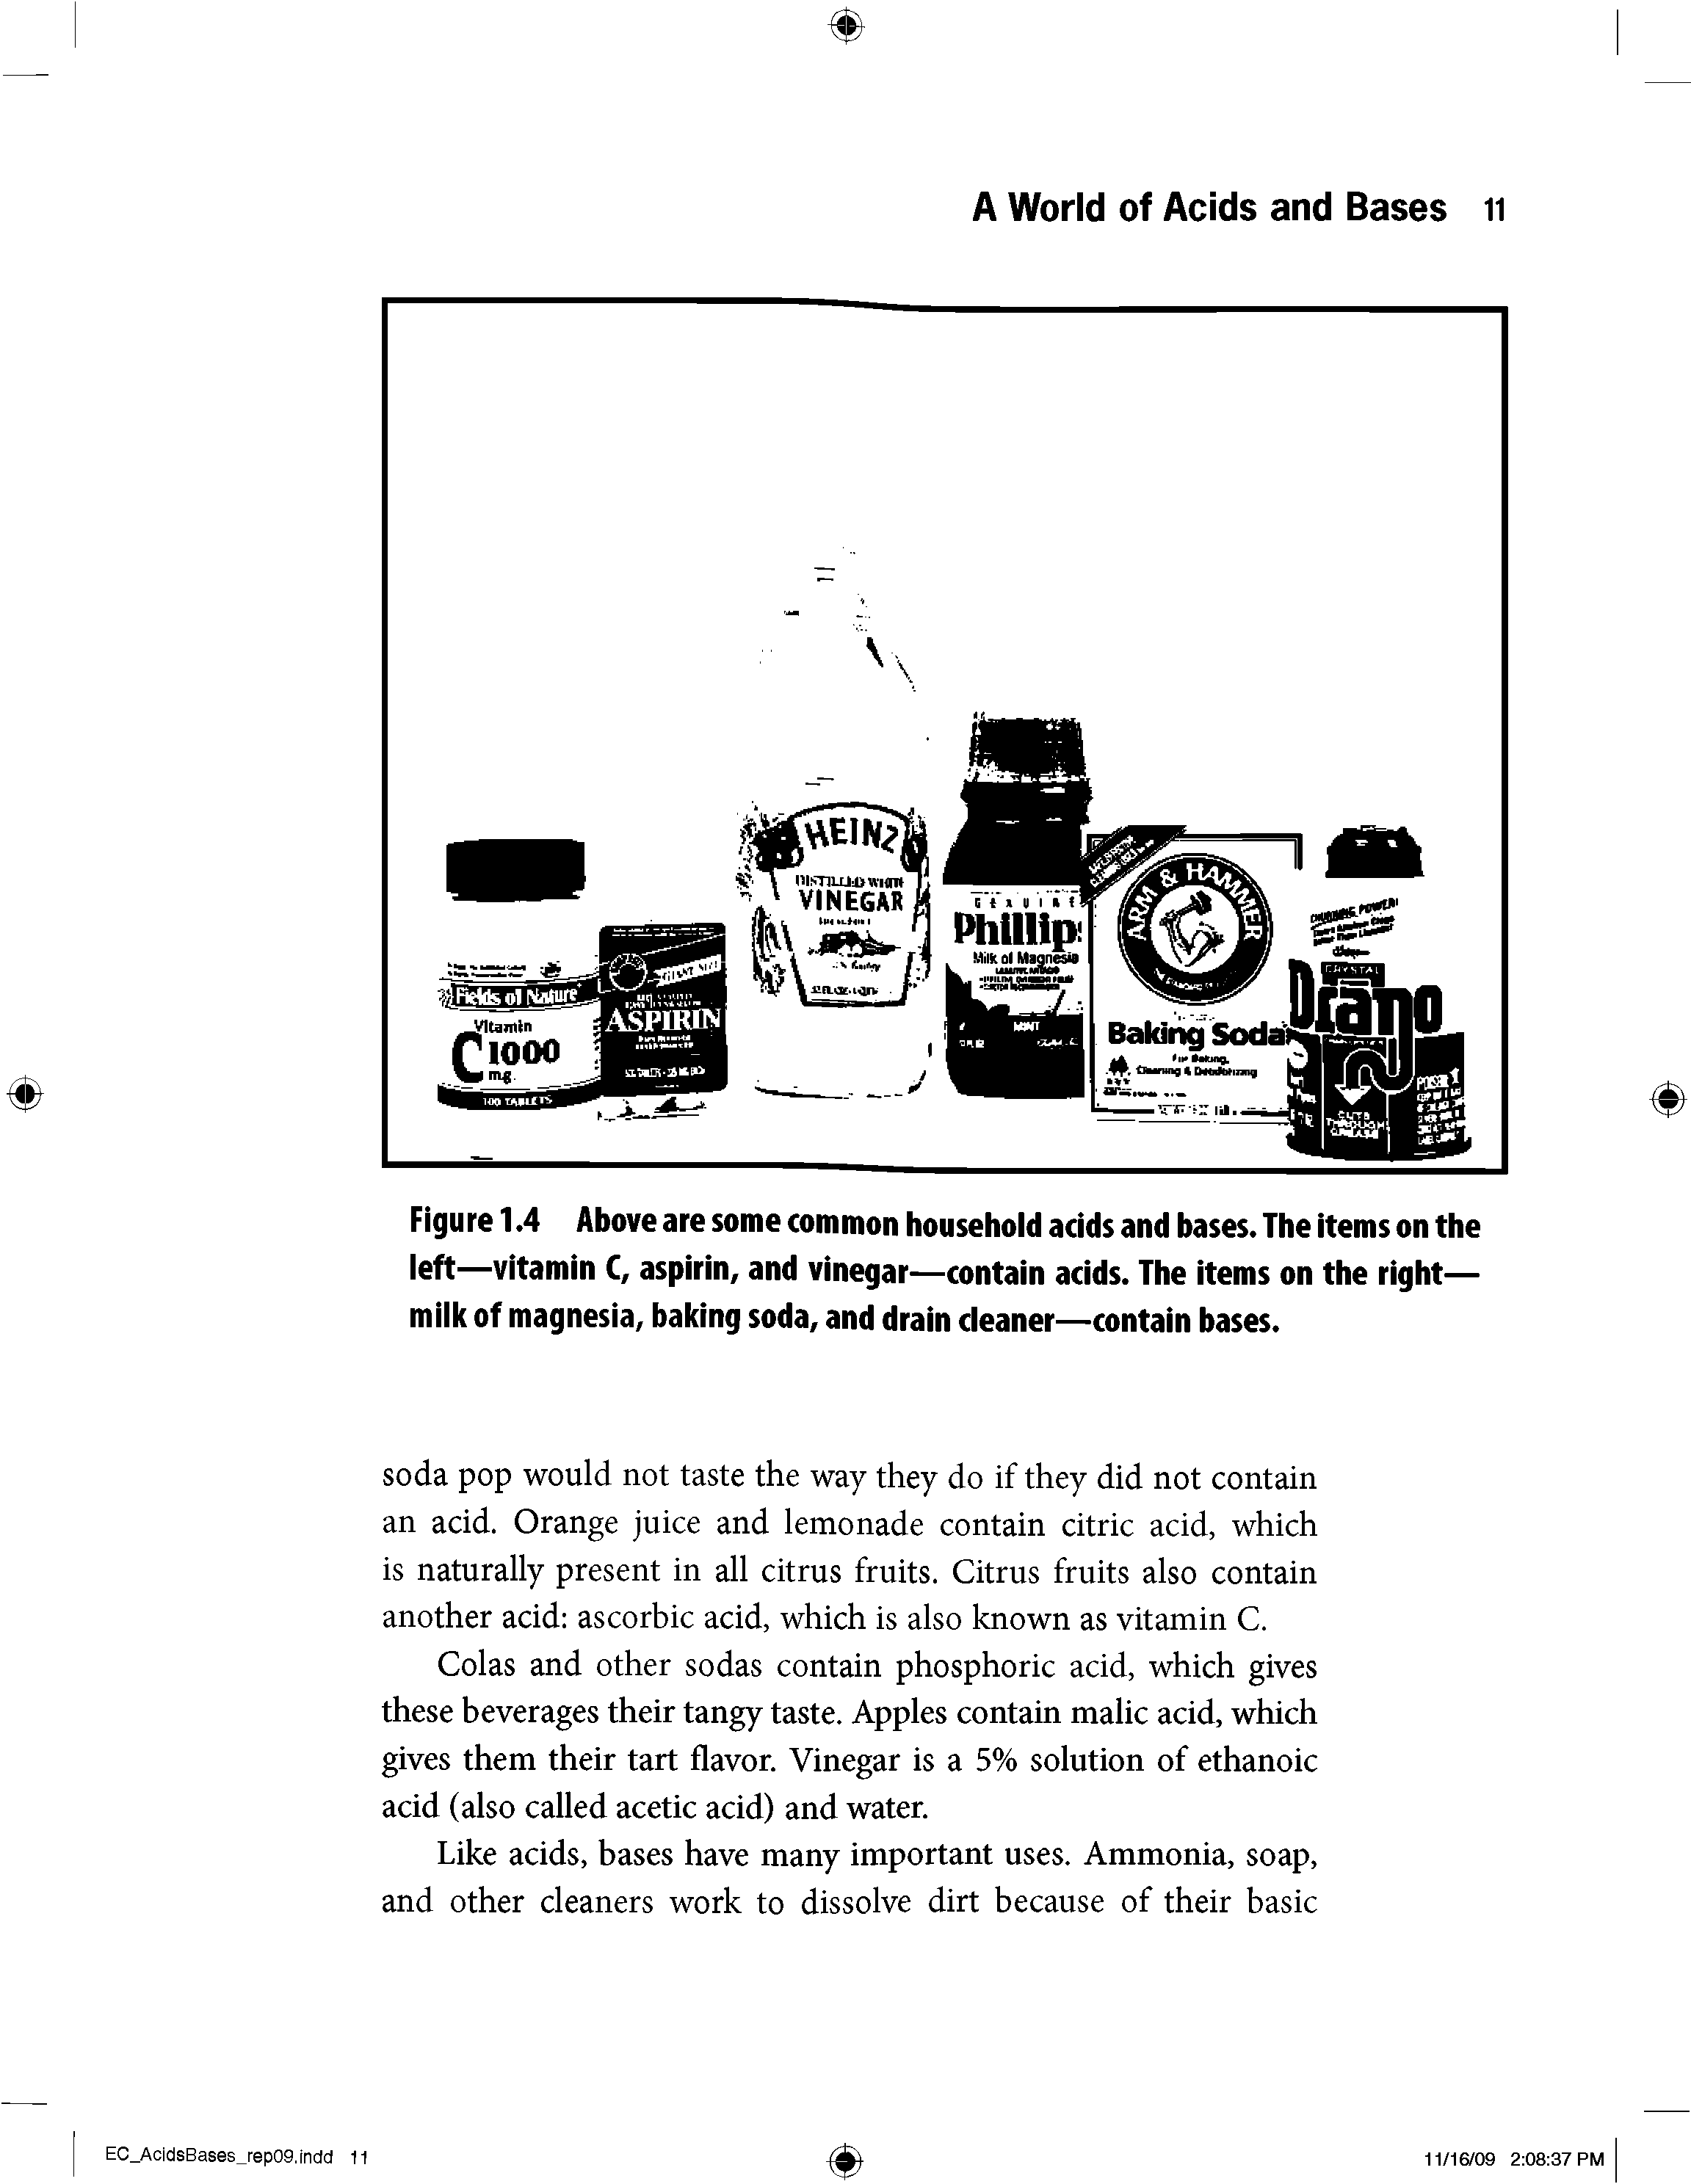 Figure 1.4 Above are some common household acids and bases. The items on the left—vitamin C, aspirin, and vinegar—contain acids. The items on the right— milk of magnesia, baking soda, and drain cleaner—contain bases.